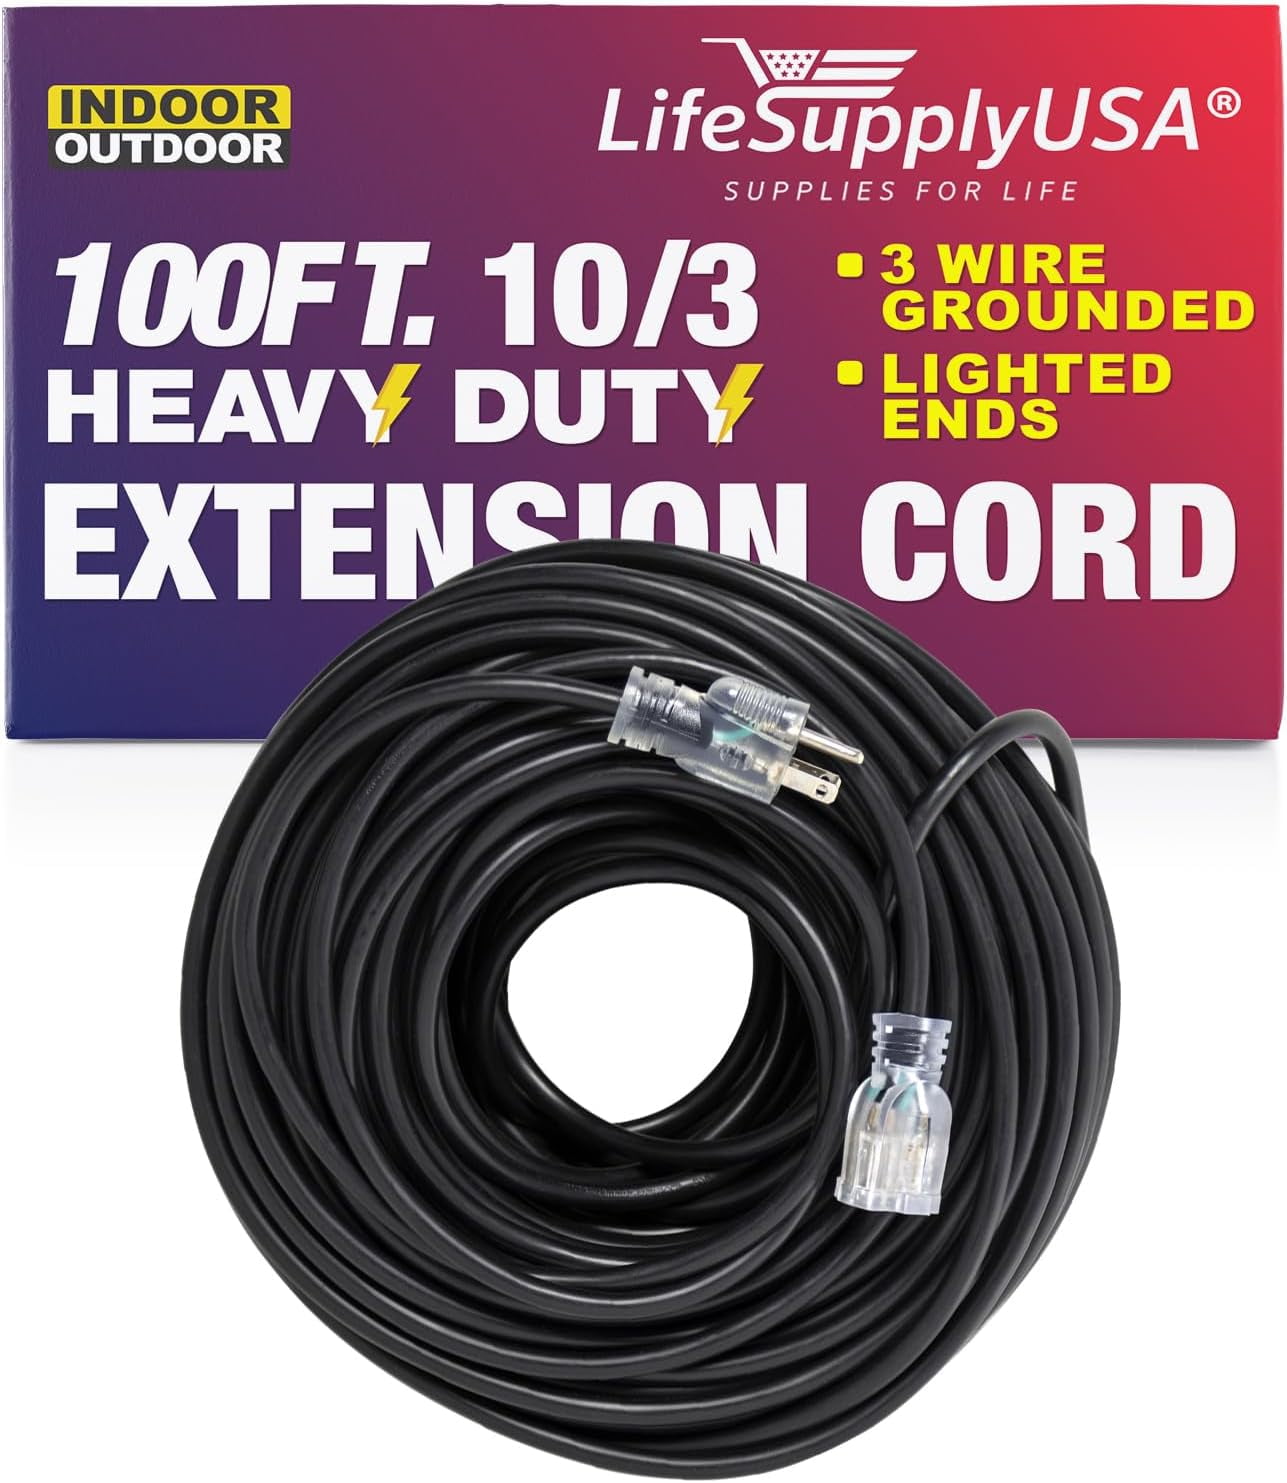 LifeSupplyUSA Indoor Outdoor Extension Cord - 100 ft Long Power Extension  Cable with Multiple Outlets, Lighted End - Heavy Duty 3 Prong, 15 AMP 125  Volts 1875 Watts, SJTW Weatherproof (Black) (1 Pack) 